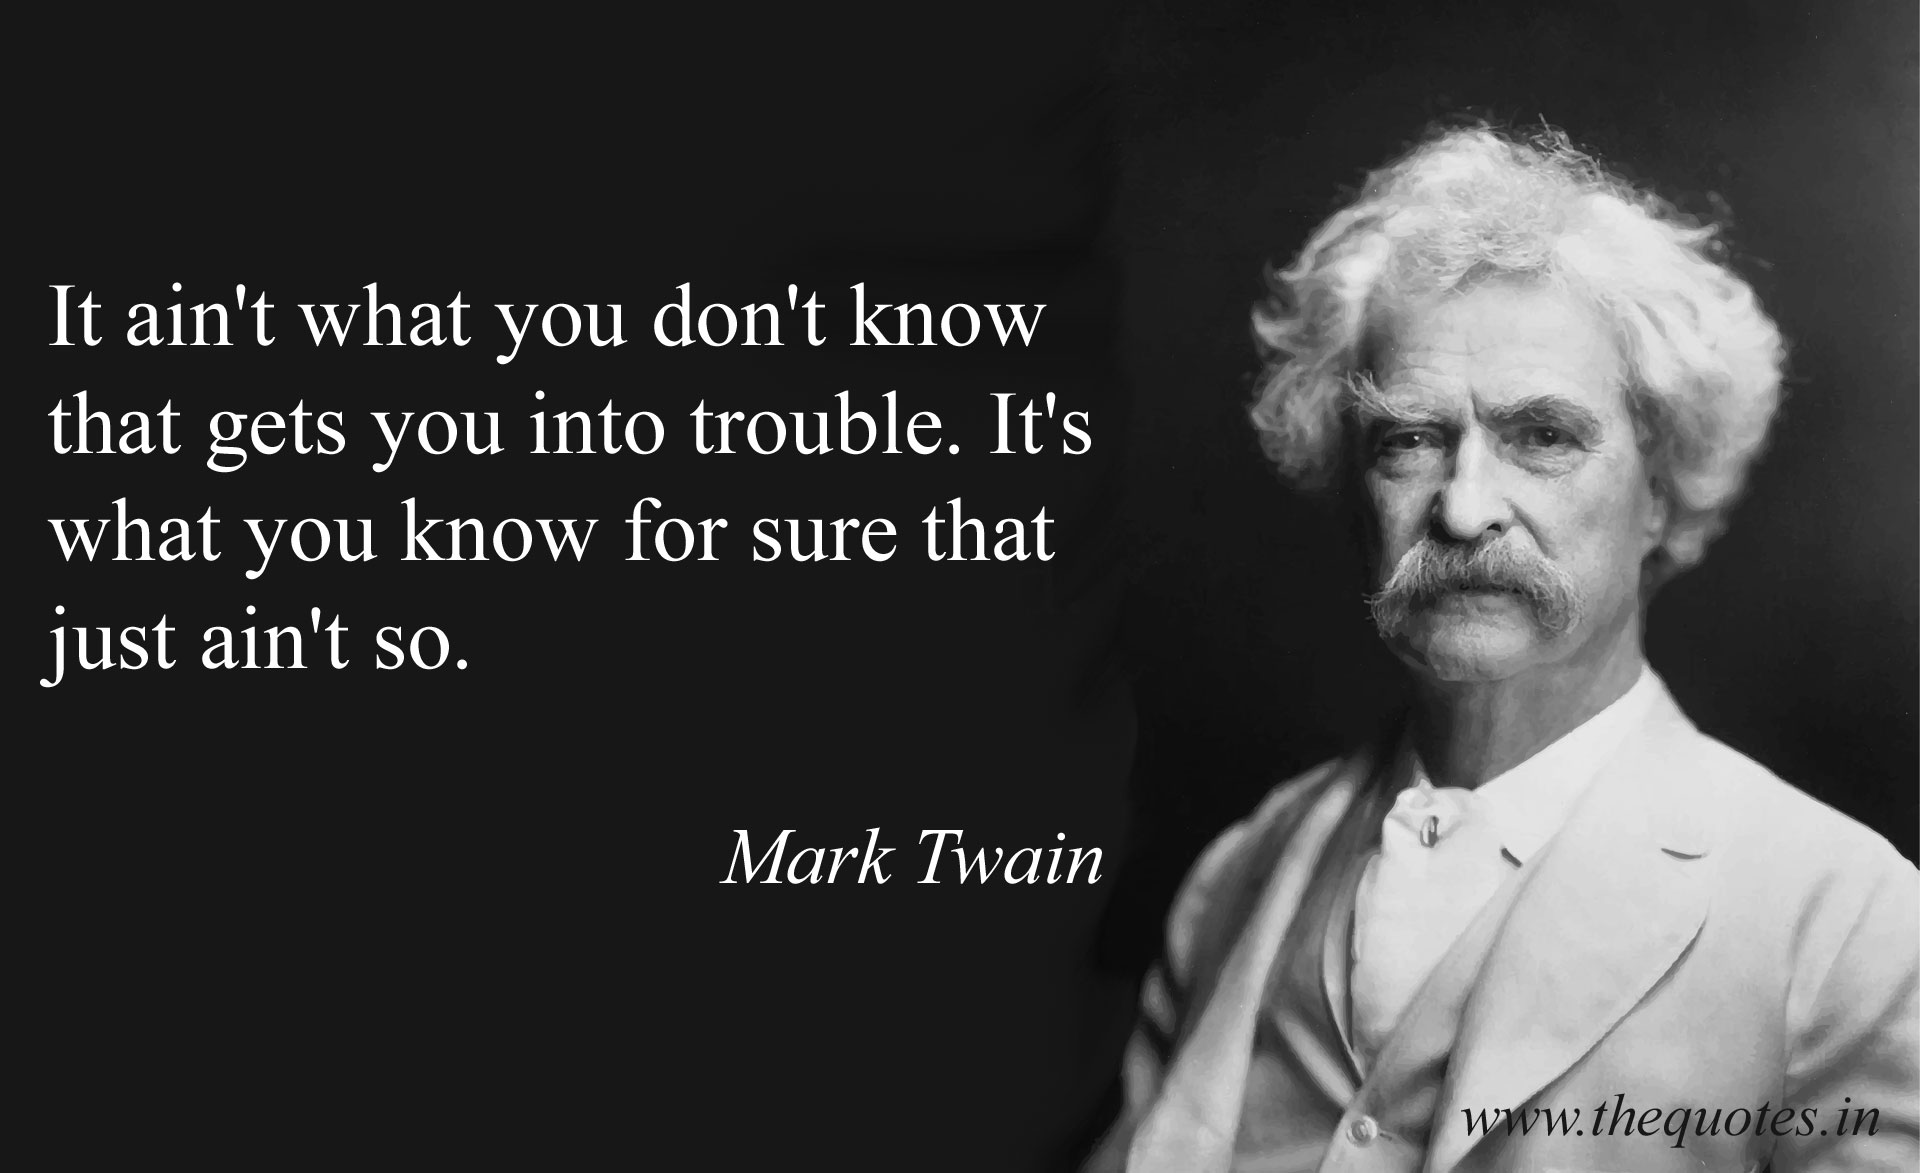 https://www.thinkindependent.com.au/wp-content/uploads/2017/03/Aint-what-you-dont-know-Image-Mark-Twain.jpg